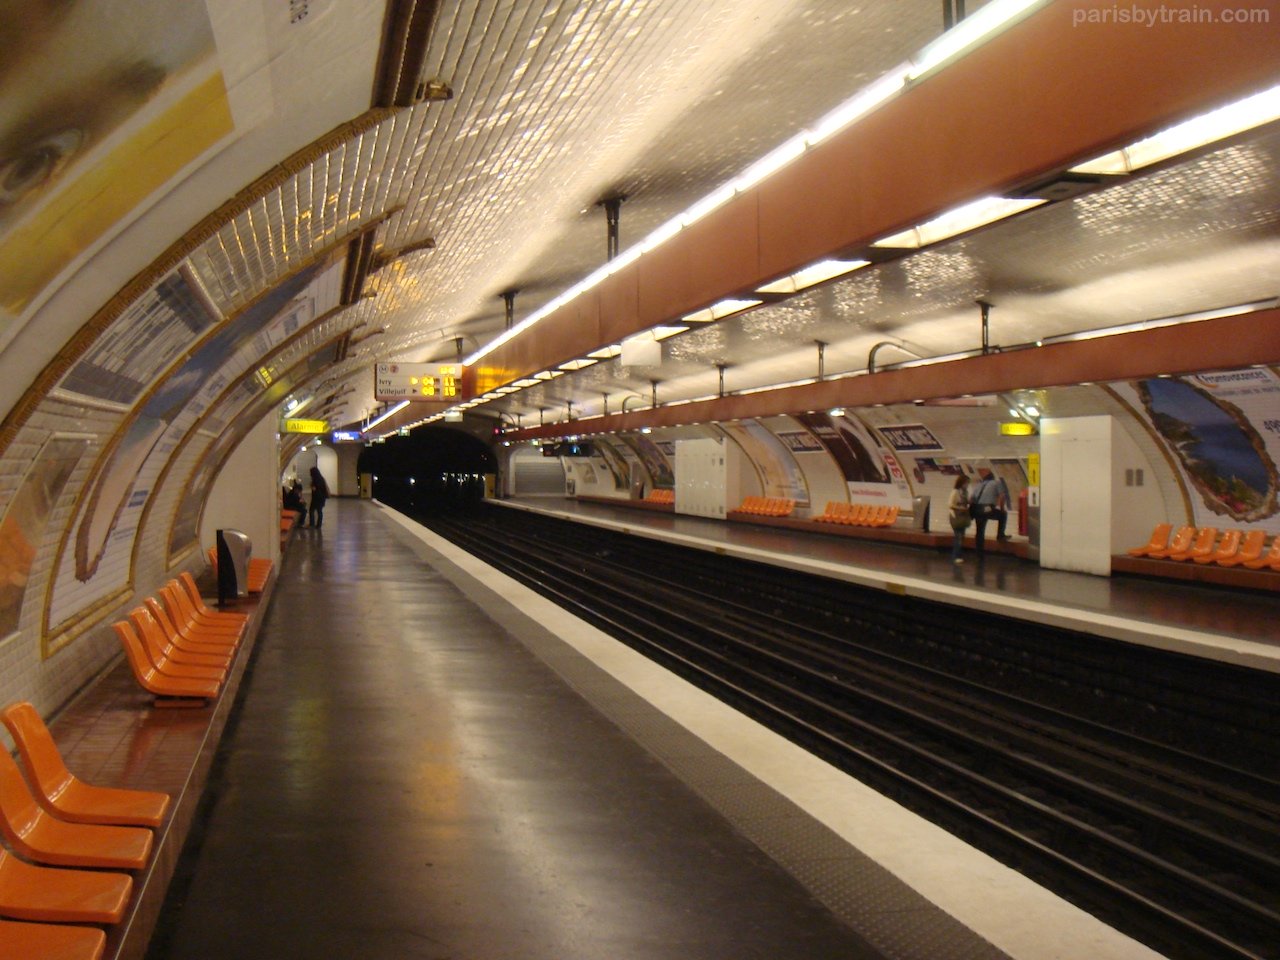 Tips&Tricks: How to Ride the Parisian Metro like a Local